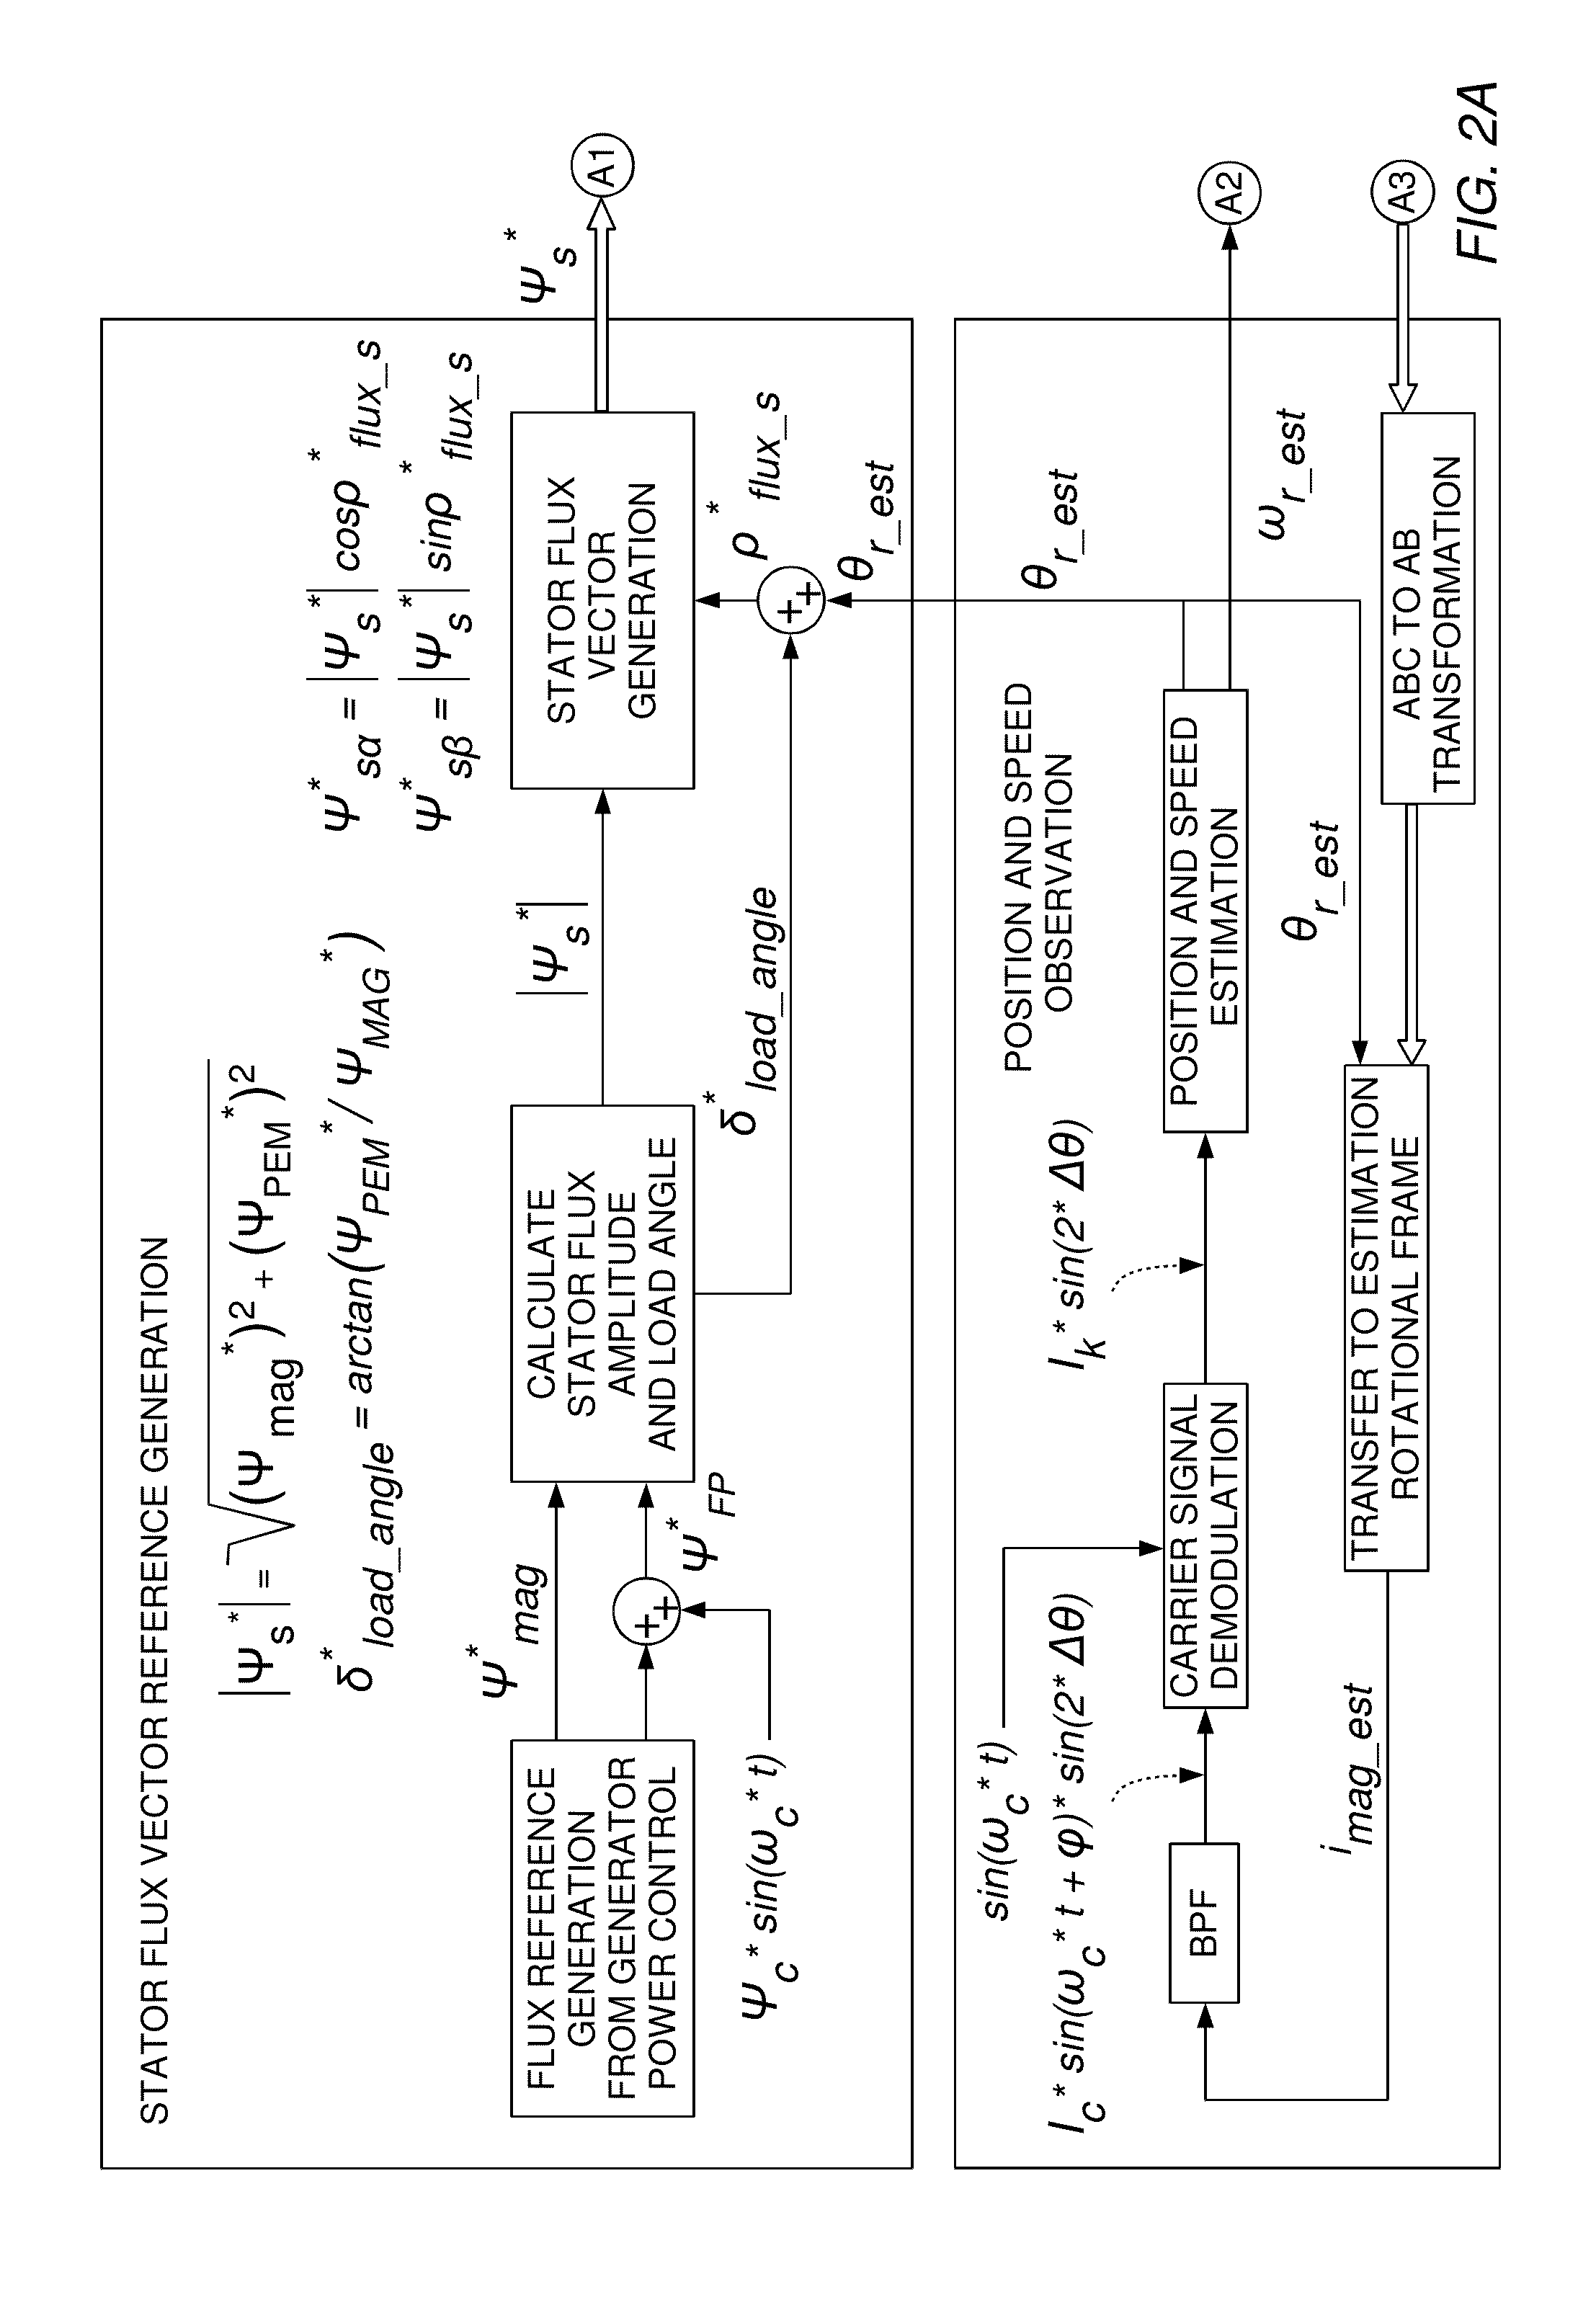 Method of position sensorless control of an electrical machine